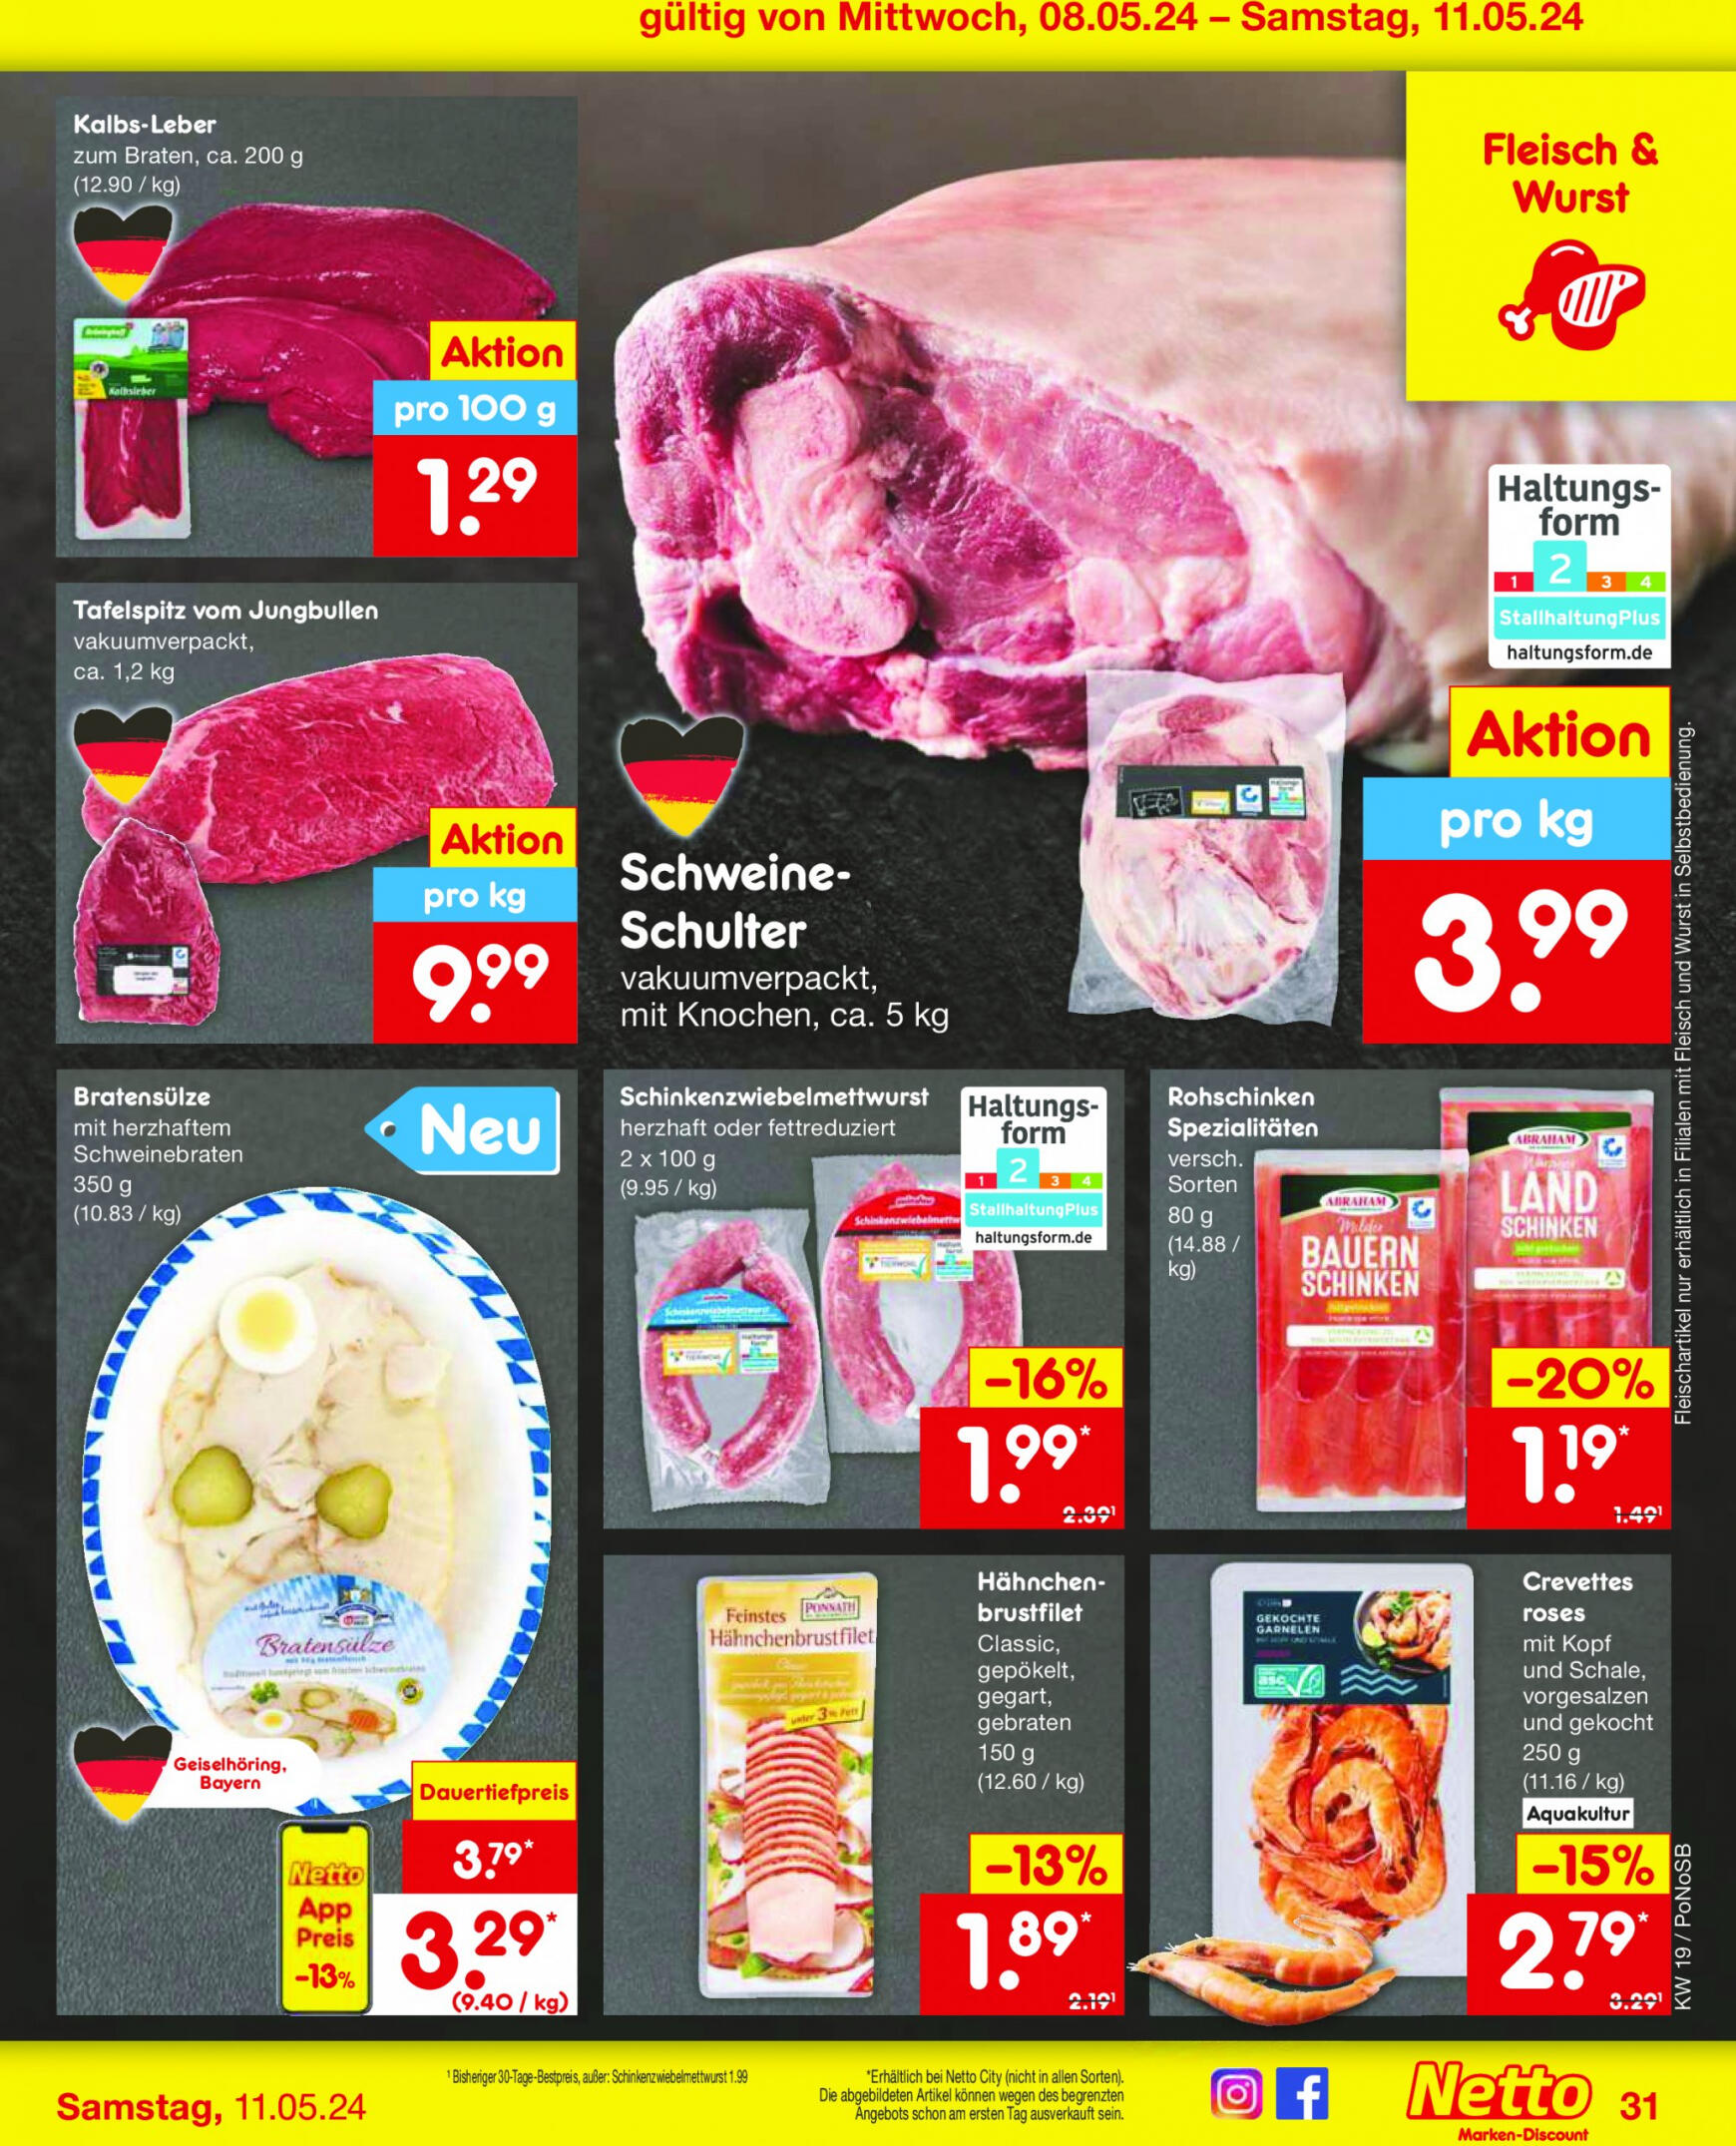 netto - Flyer Netto aktuell 06.05. - 11.05. - page: 41